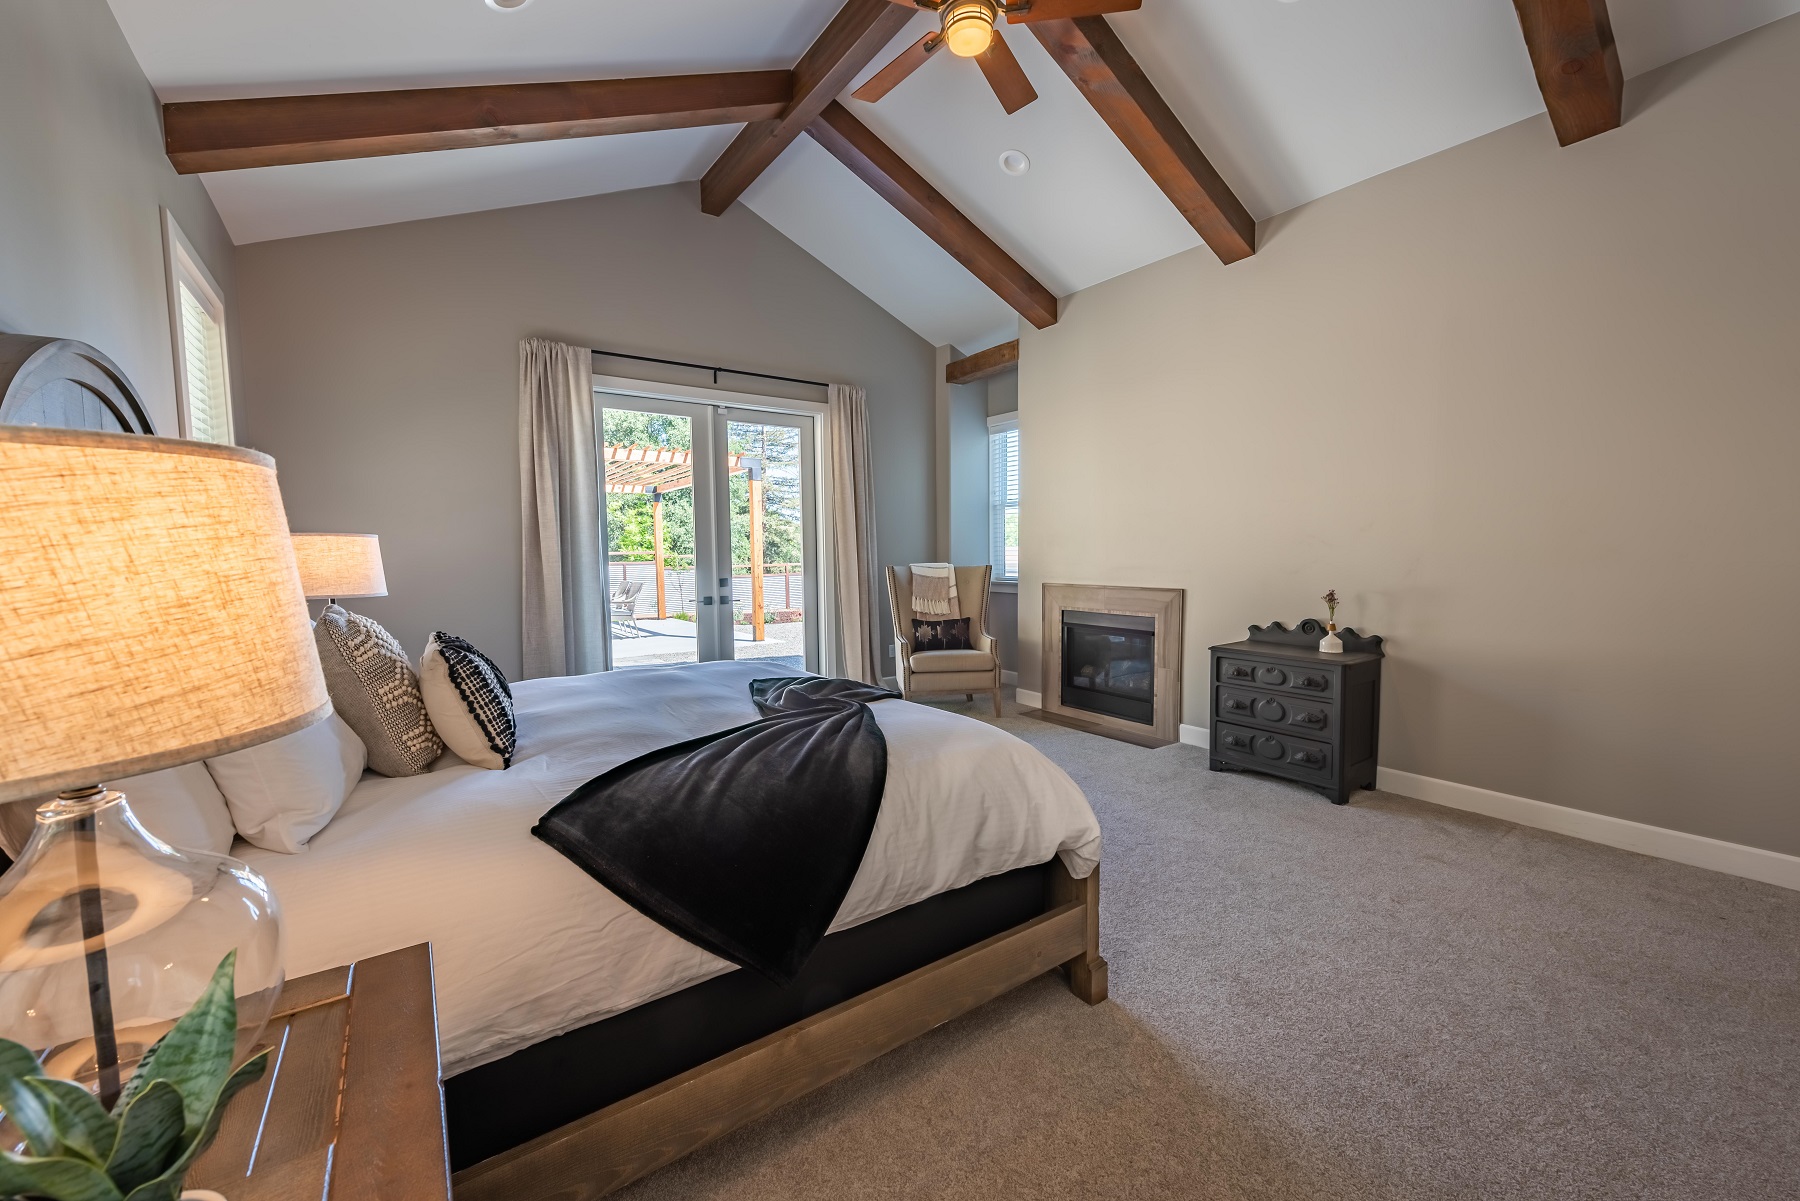 Master bedroom with king bed and ceiling fan.